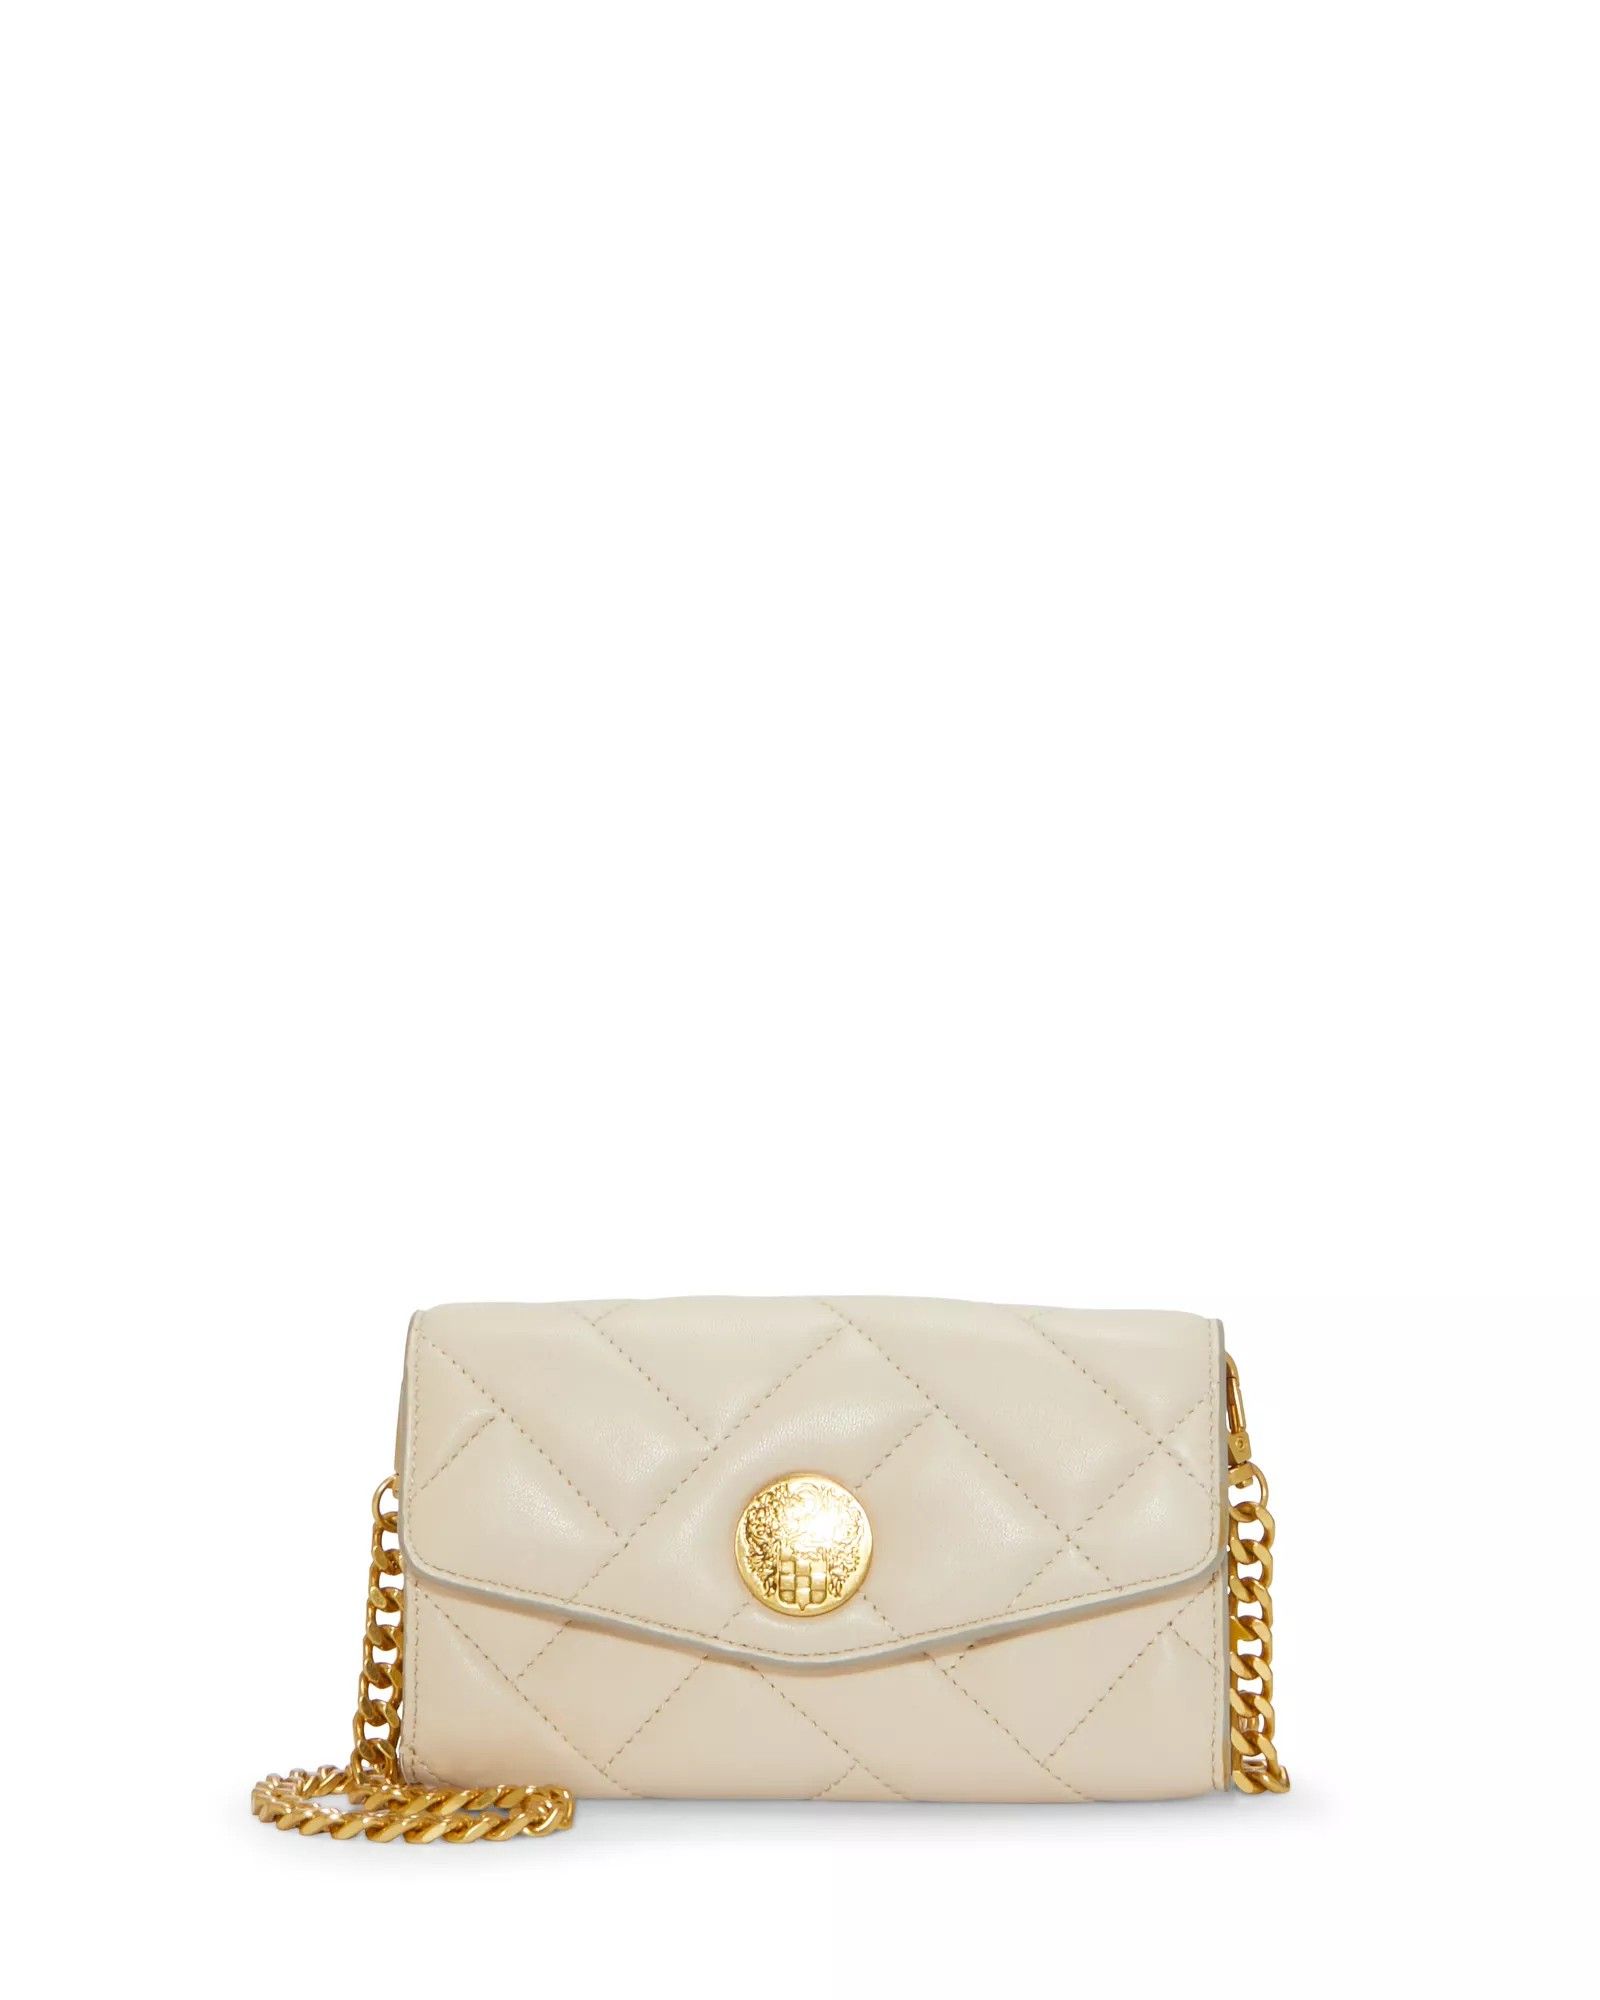 Vince Camuto Kisho Wallet on a Chain | Vince Camuto